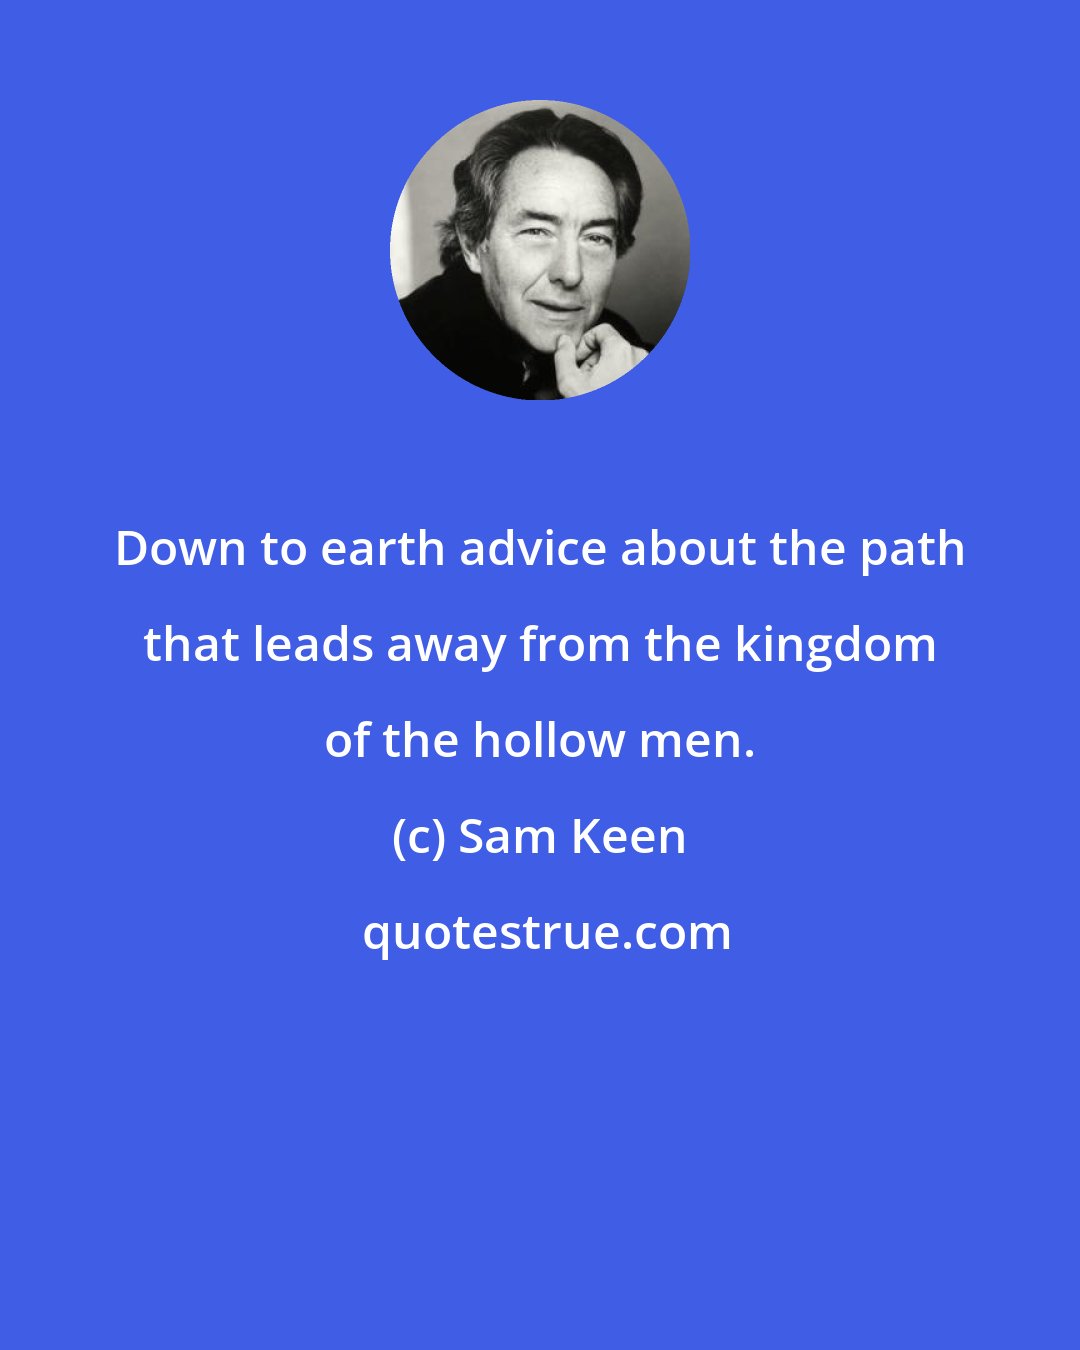 Sam Keen: Down to earth advice about the path that leads away from the kingdom of the hollow men.